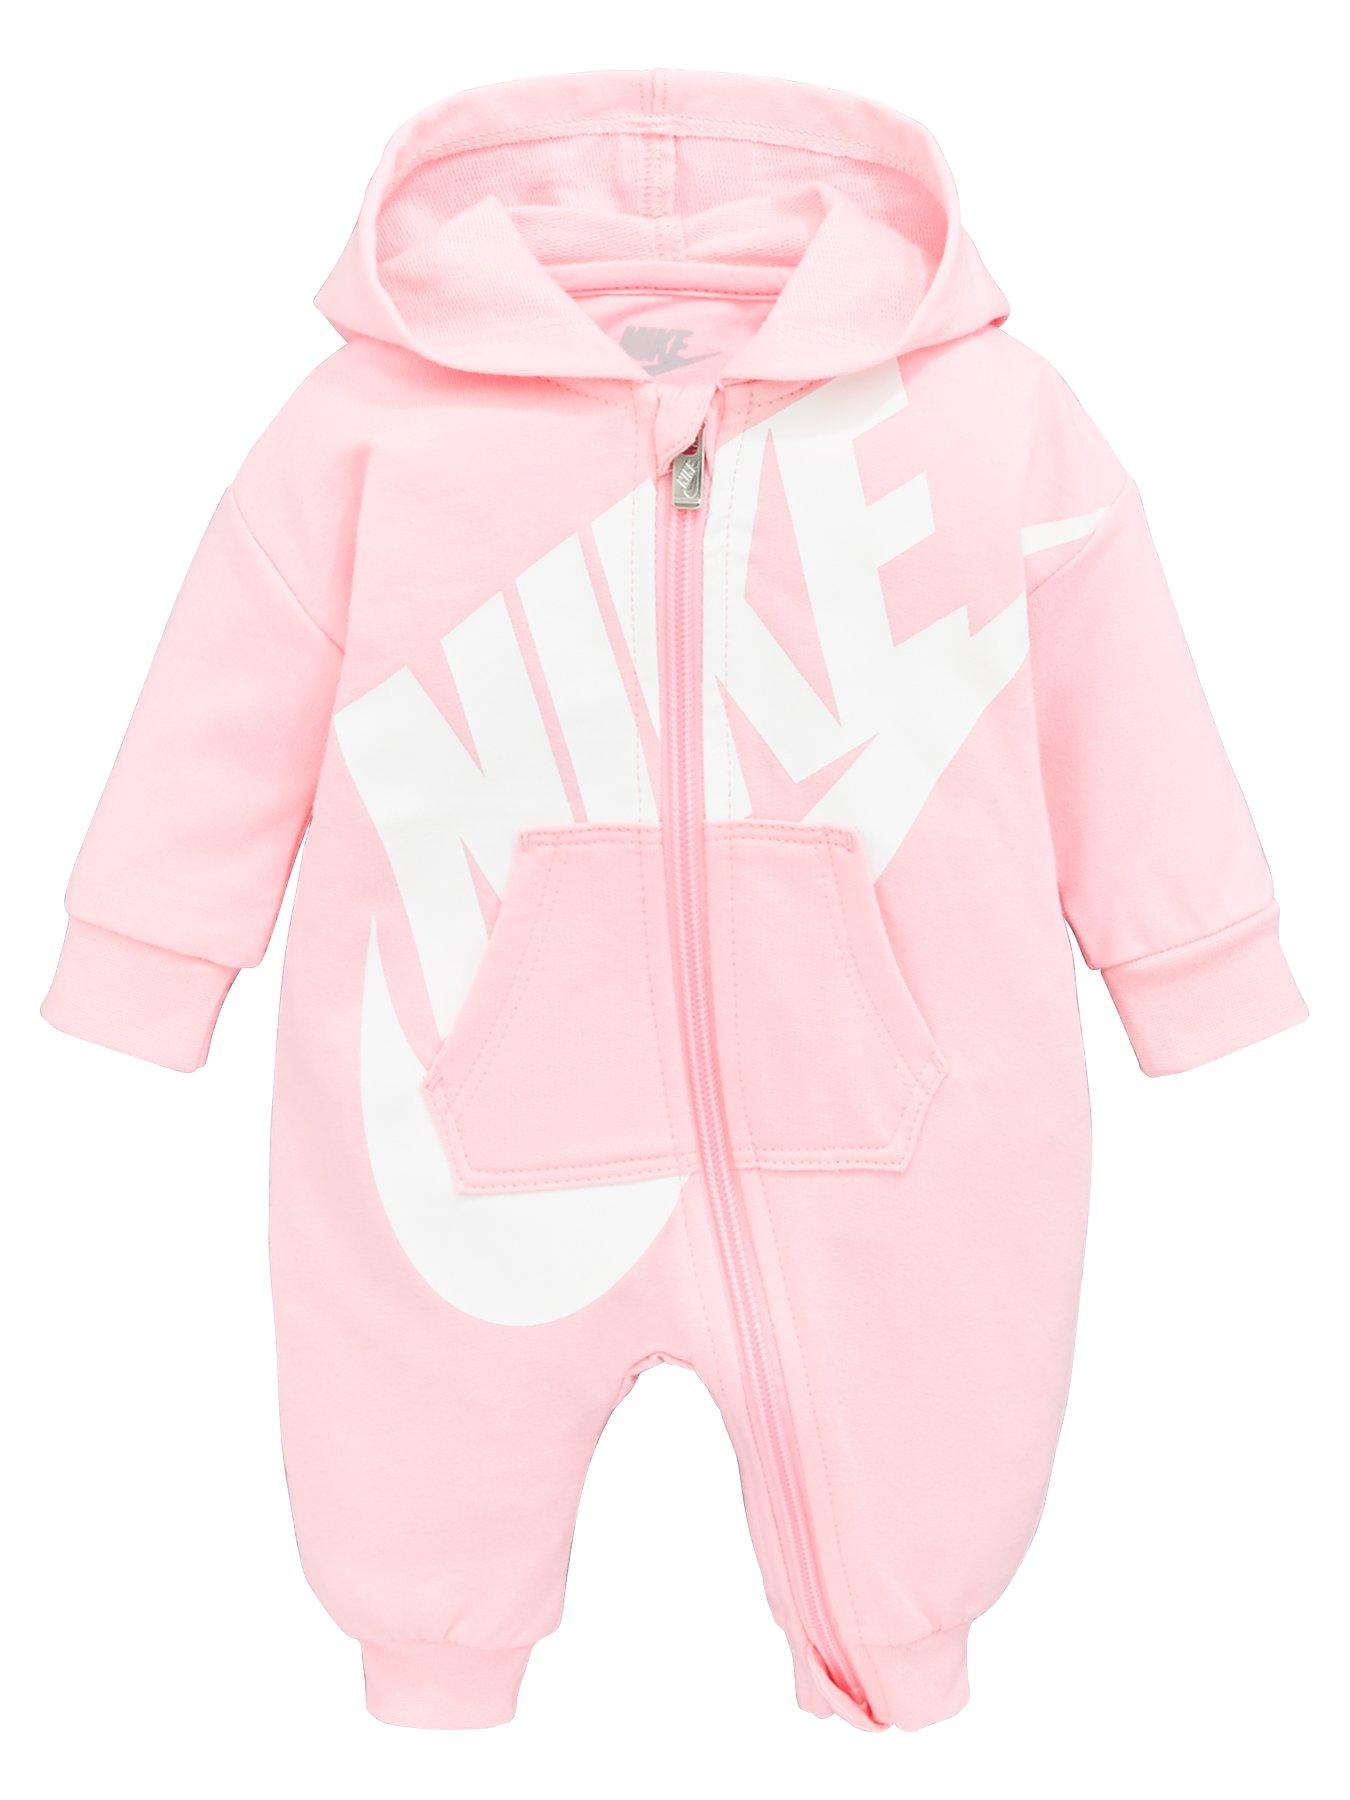 nike baby outfits girl